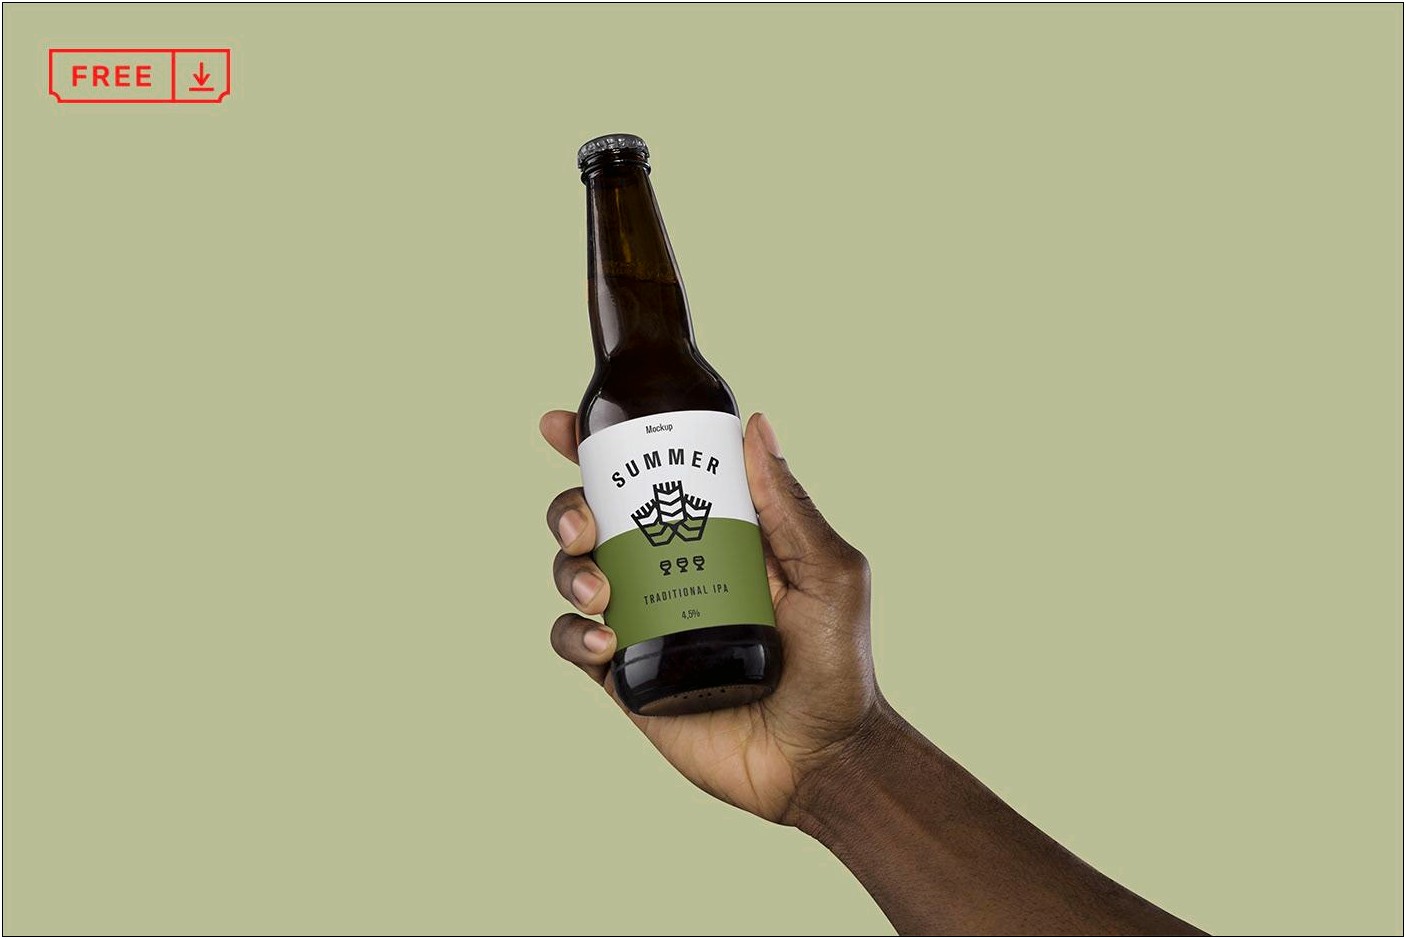 Free Beer Bottle Label Template Photoshop